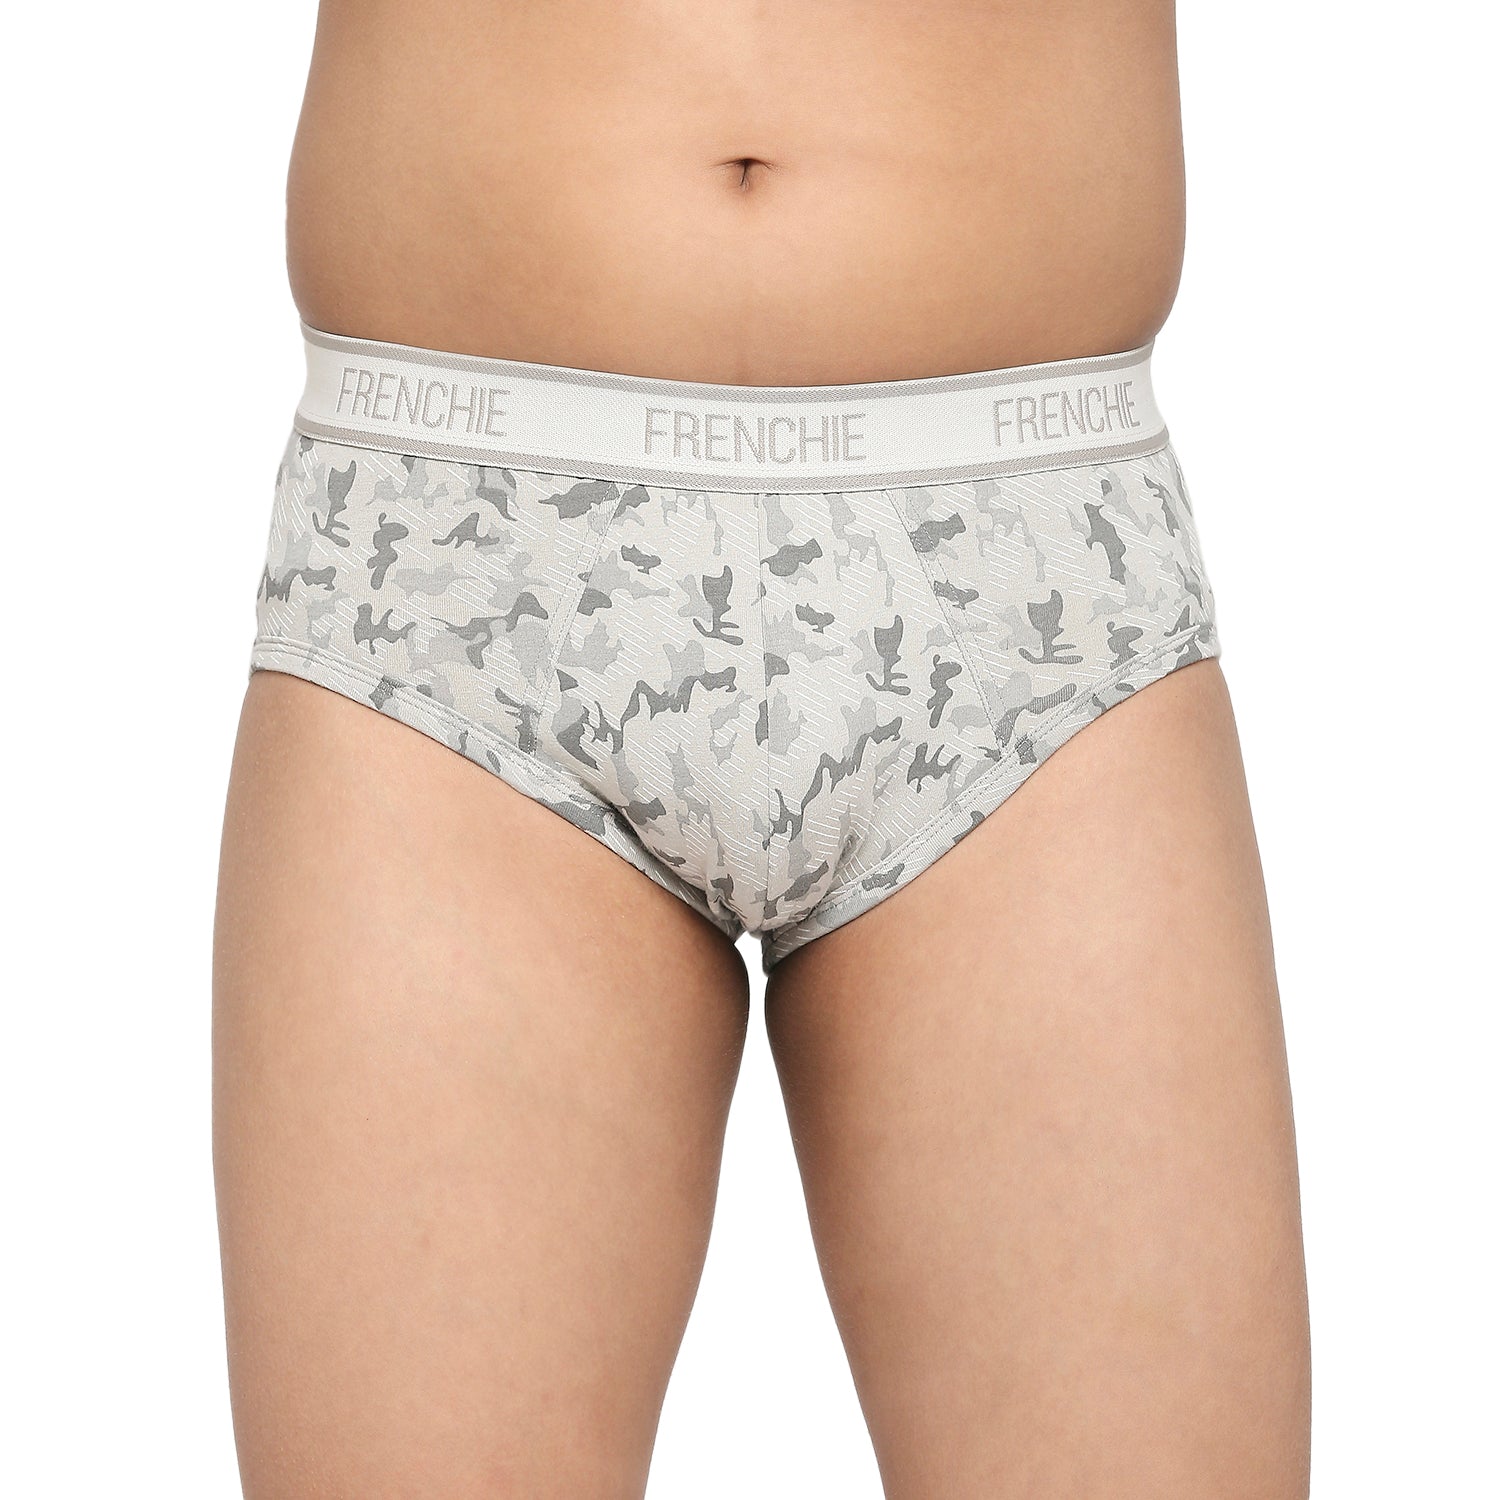 FRENCHIE Teenagers Cotton Brief Gray and Light Gray - Pack of 2